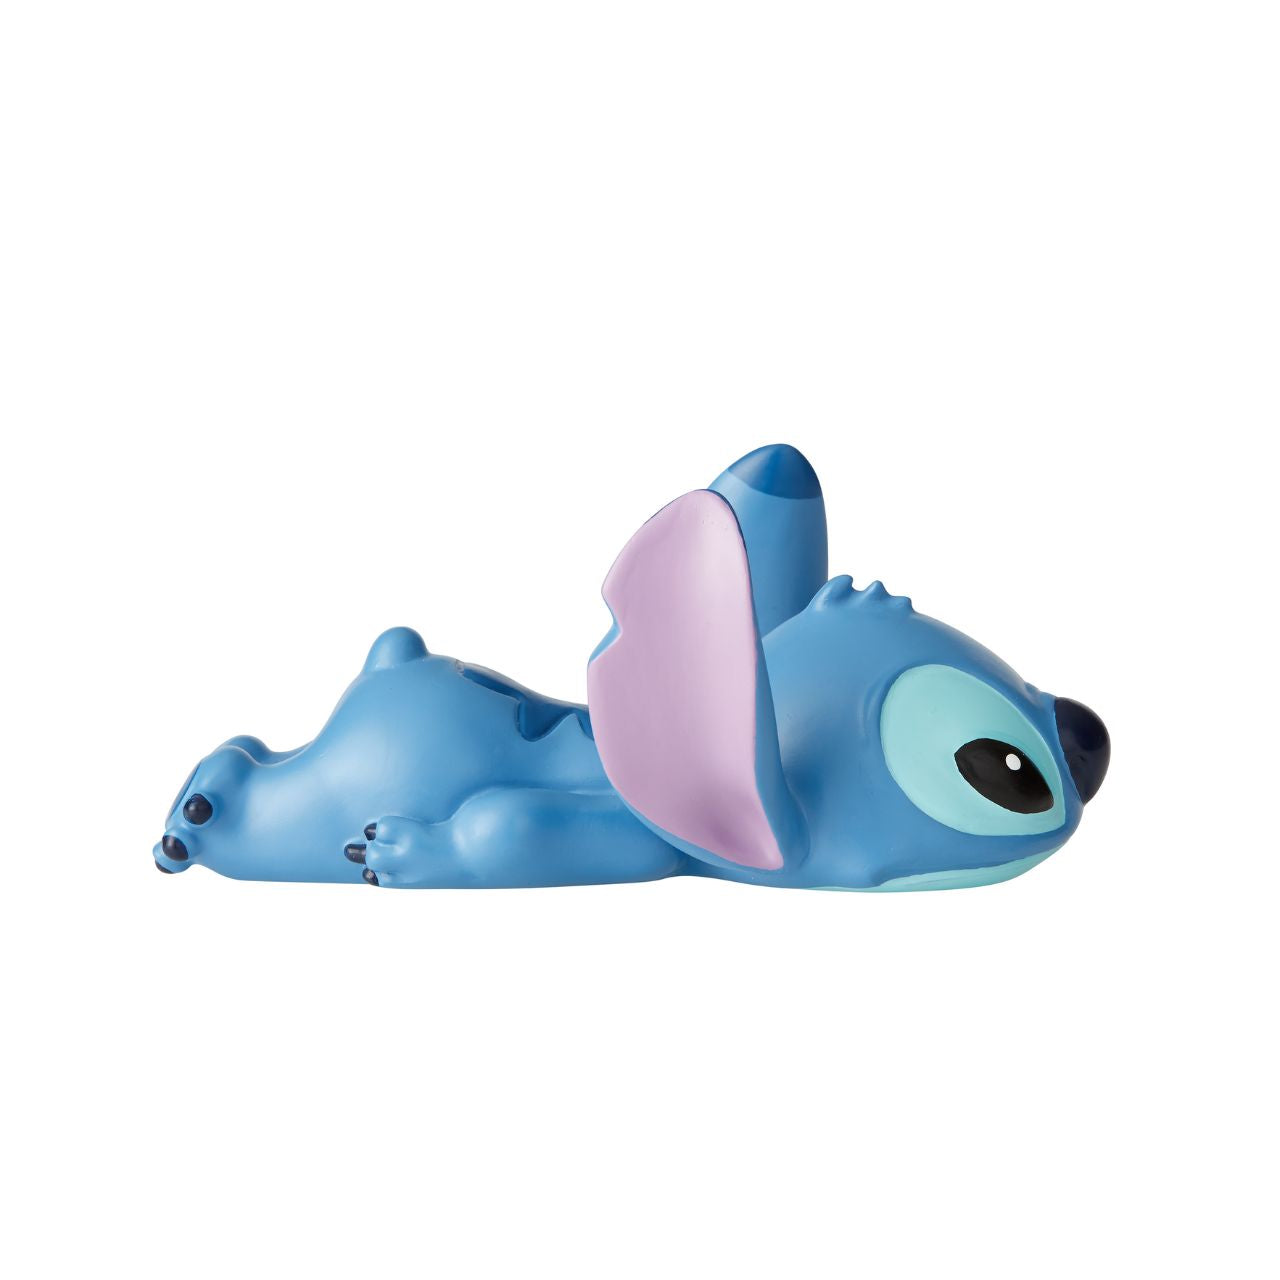 Stitch Laying Down Figurine by Disney Showcase  Stubborn Stitch is still as cute as ever, and this little guy can't help but make you smile. Cute, clever and charismatic, Stitch's fun-loving nature is just what you need to brighten your day.